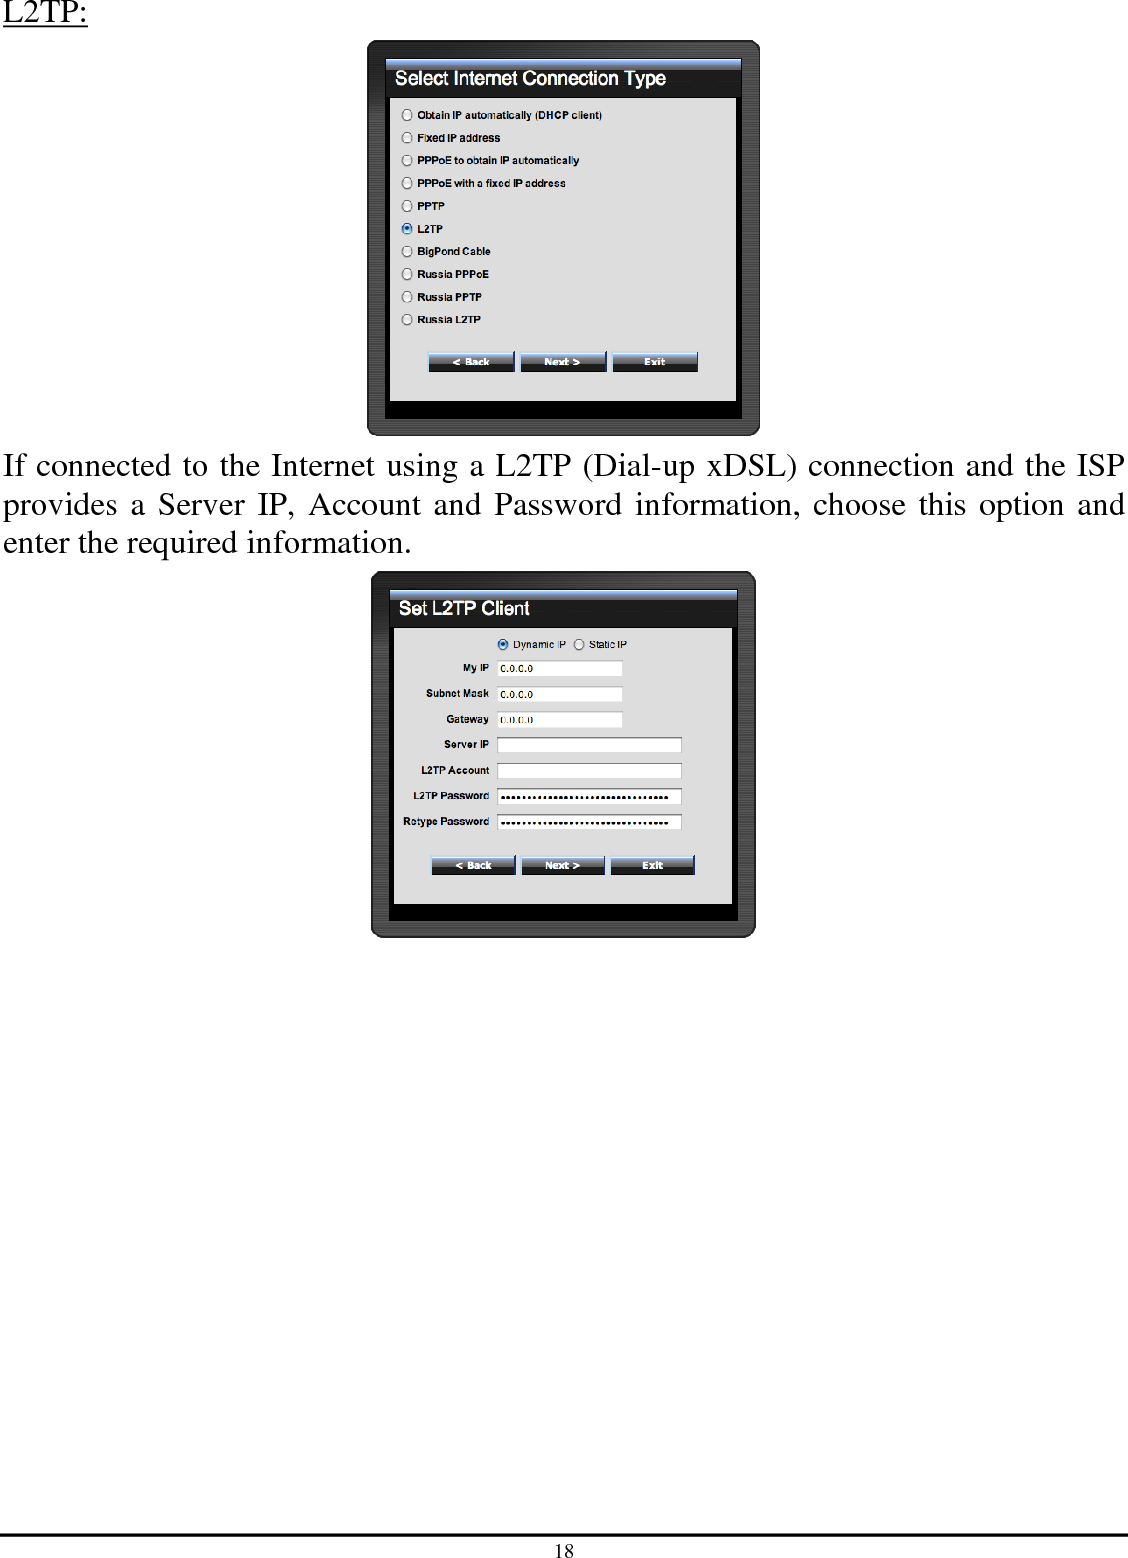 18 L2TP:  If connected to the Internet using a L2TP (Dial-up xDSL) connection and the ISP provides a Server IP, Account and Password information, choose this option and enter the required information.  